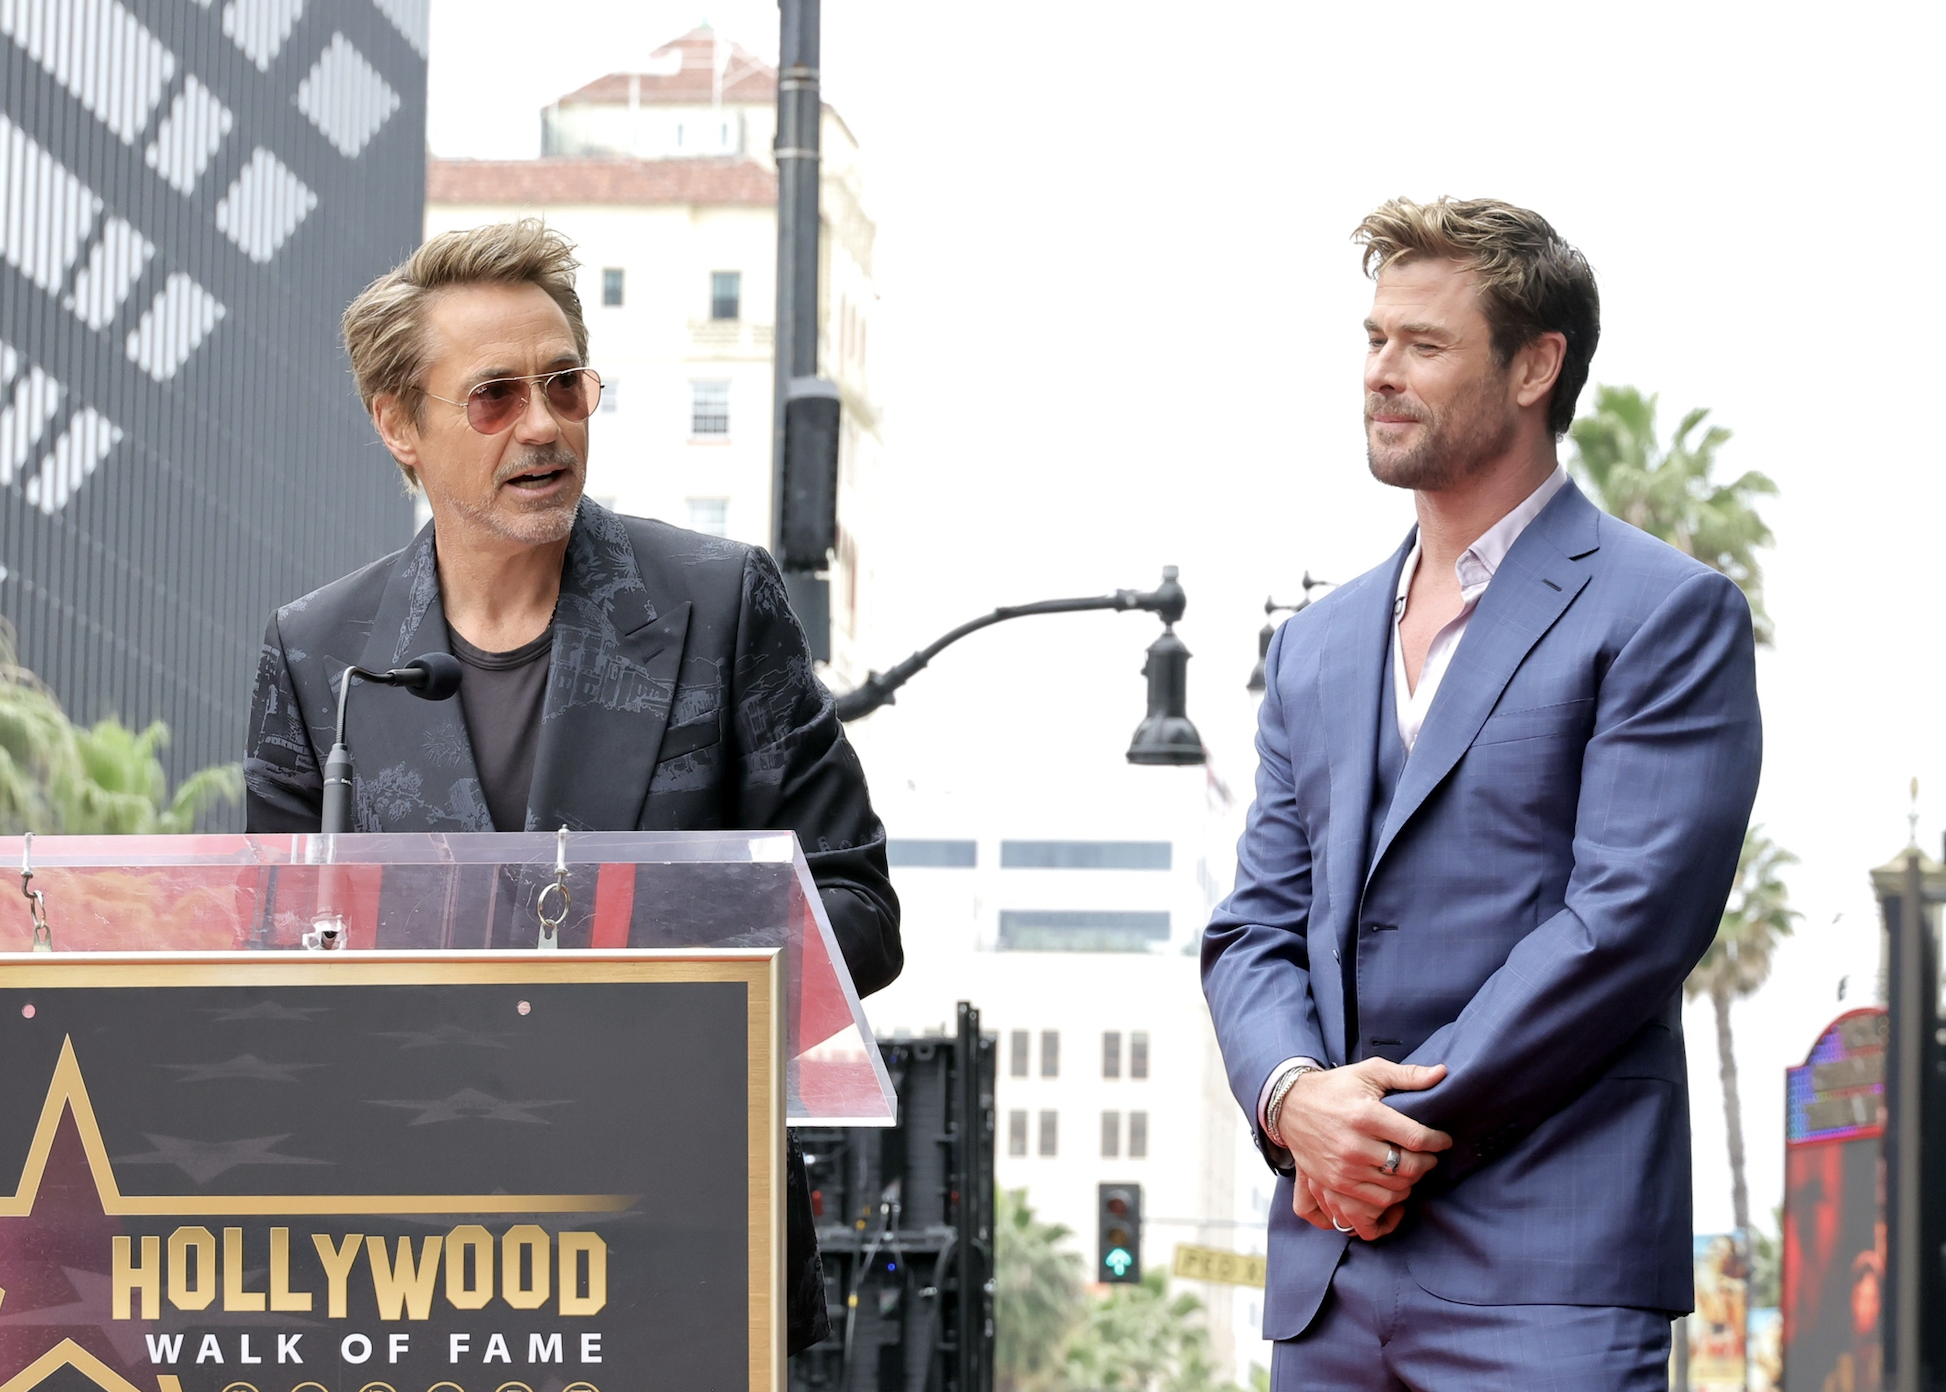 Robert Downey Jr. Roasts Chris Hemsworth by Asking ‘Avengers’ Cast to Describe ‘Thor’ Star in Three Words; Chris Evans Says...